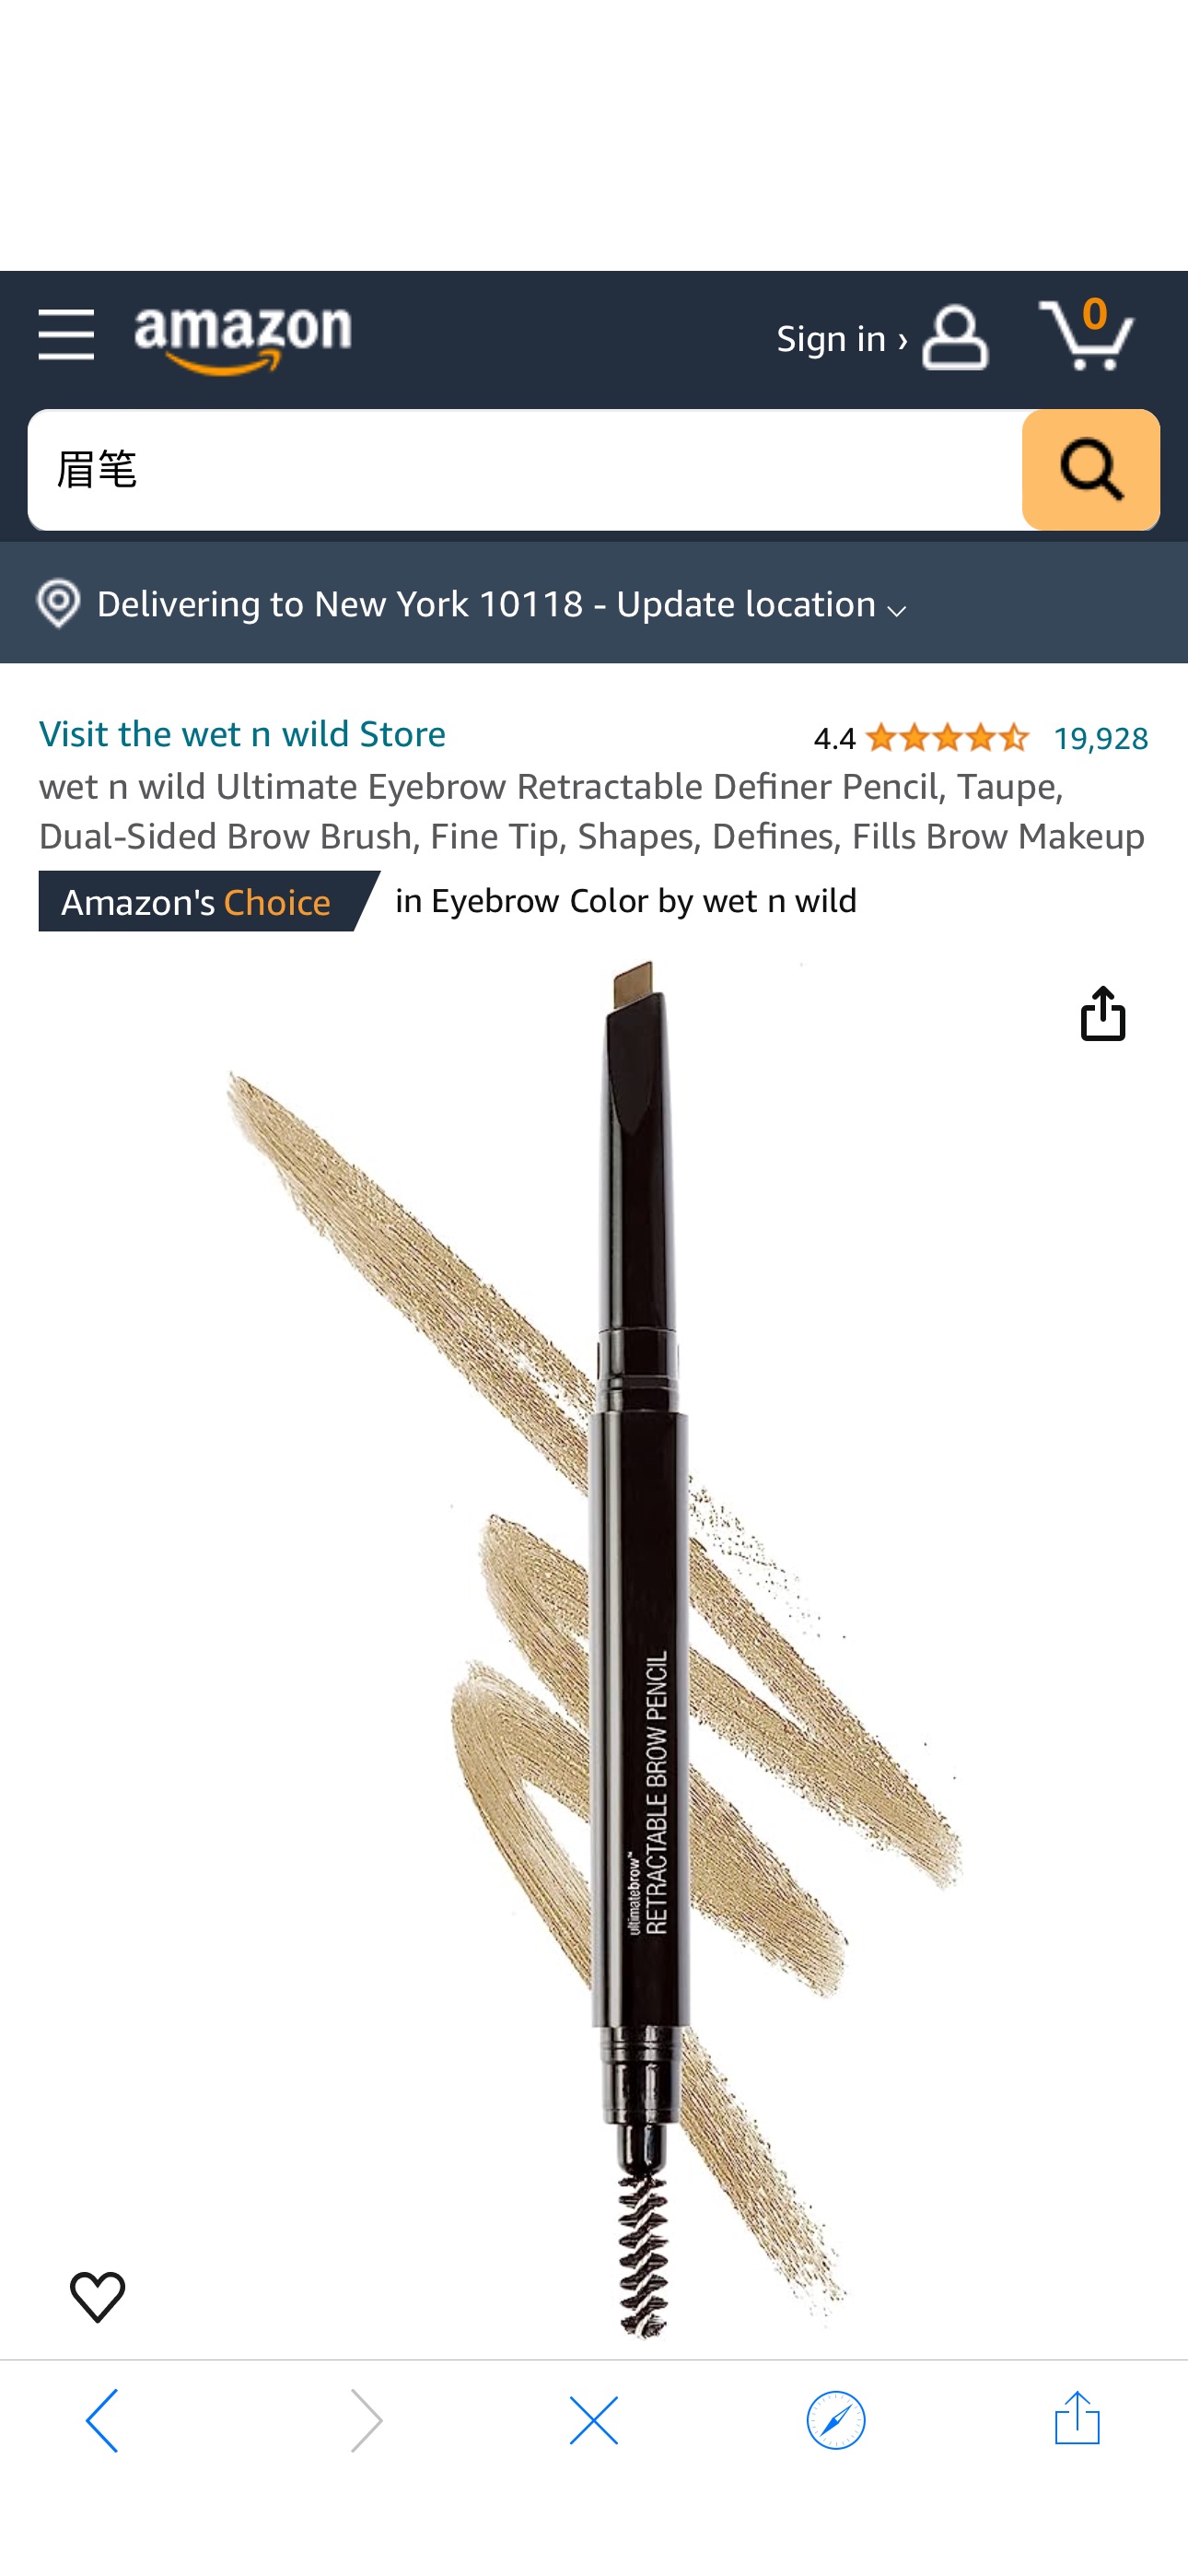 Amazon.com : wet n wild Ultimate Eyebrow Retractable Definer Pencil, Taupe, Dual-Sided Brow Brush, Fine Tip, Shapes, Defines, Fills Brow Makeup : Beauty & Personal Care